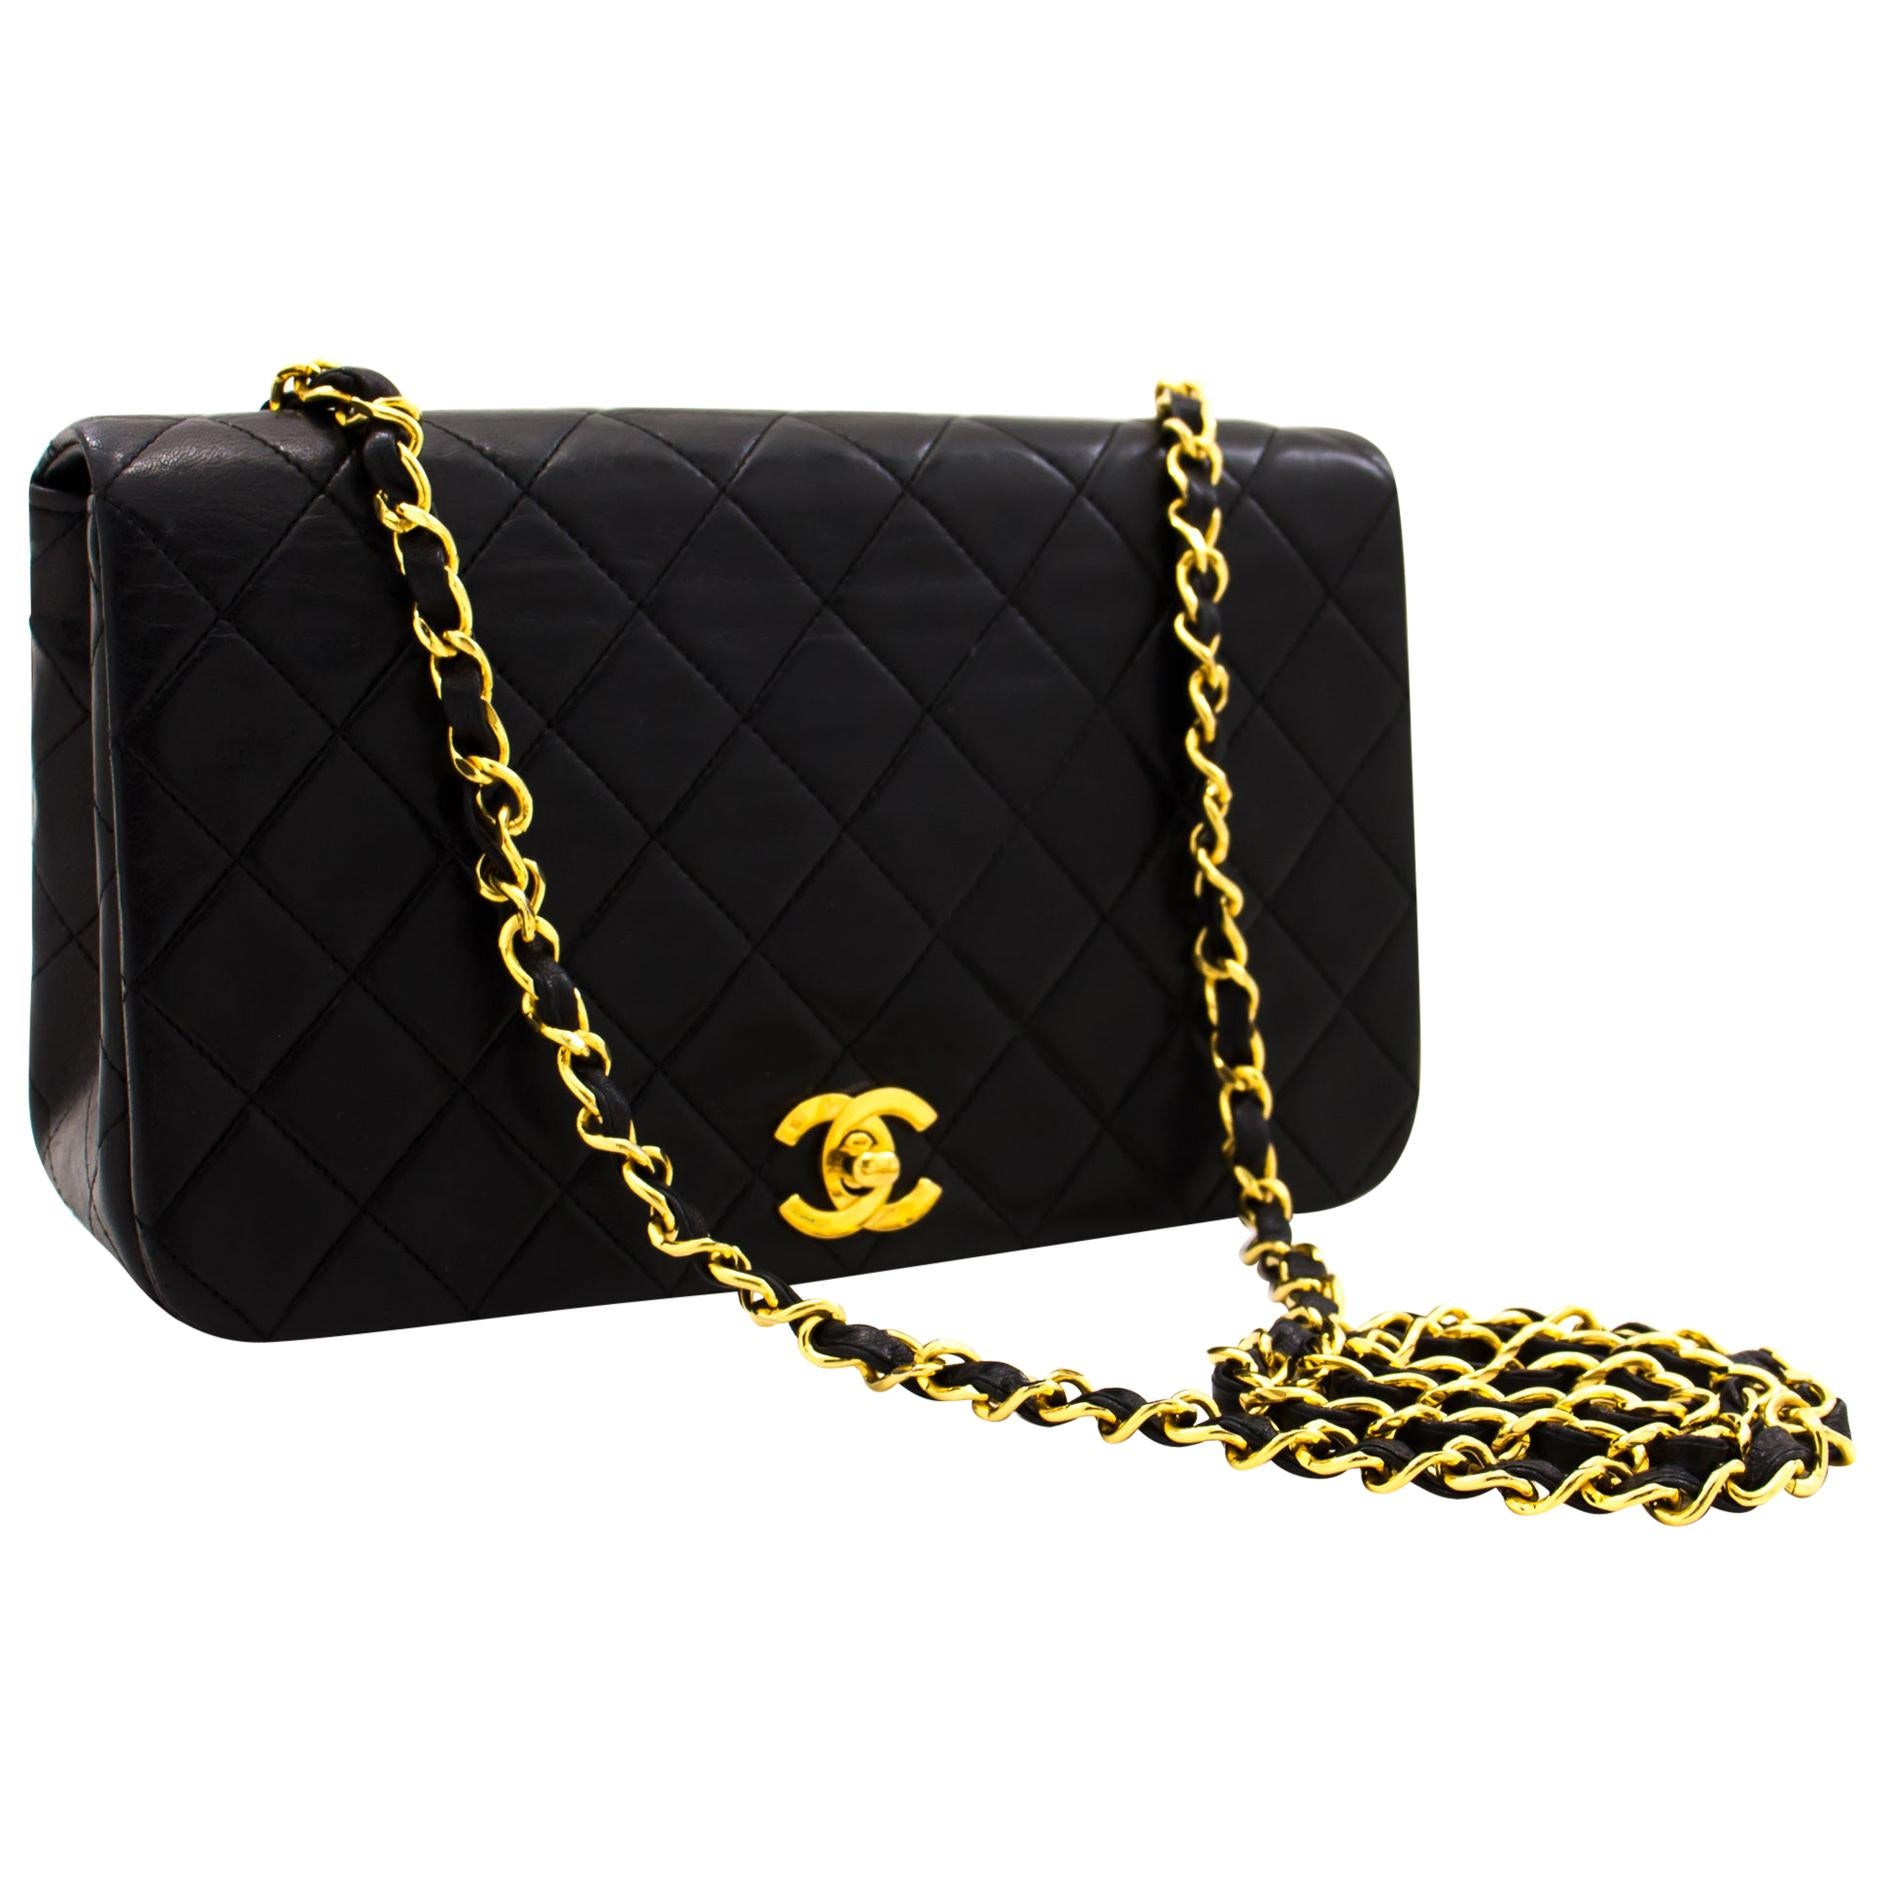 CHANEL Chain Shoulder Bag Black Flap Quilted Lambskin Leather